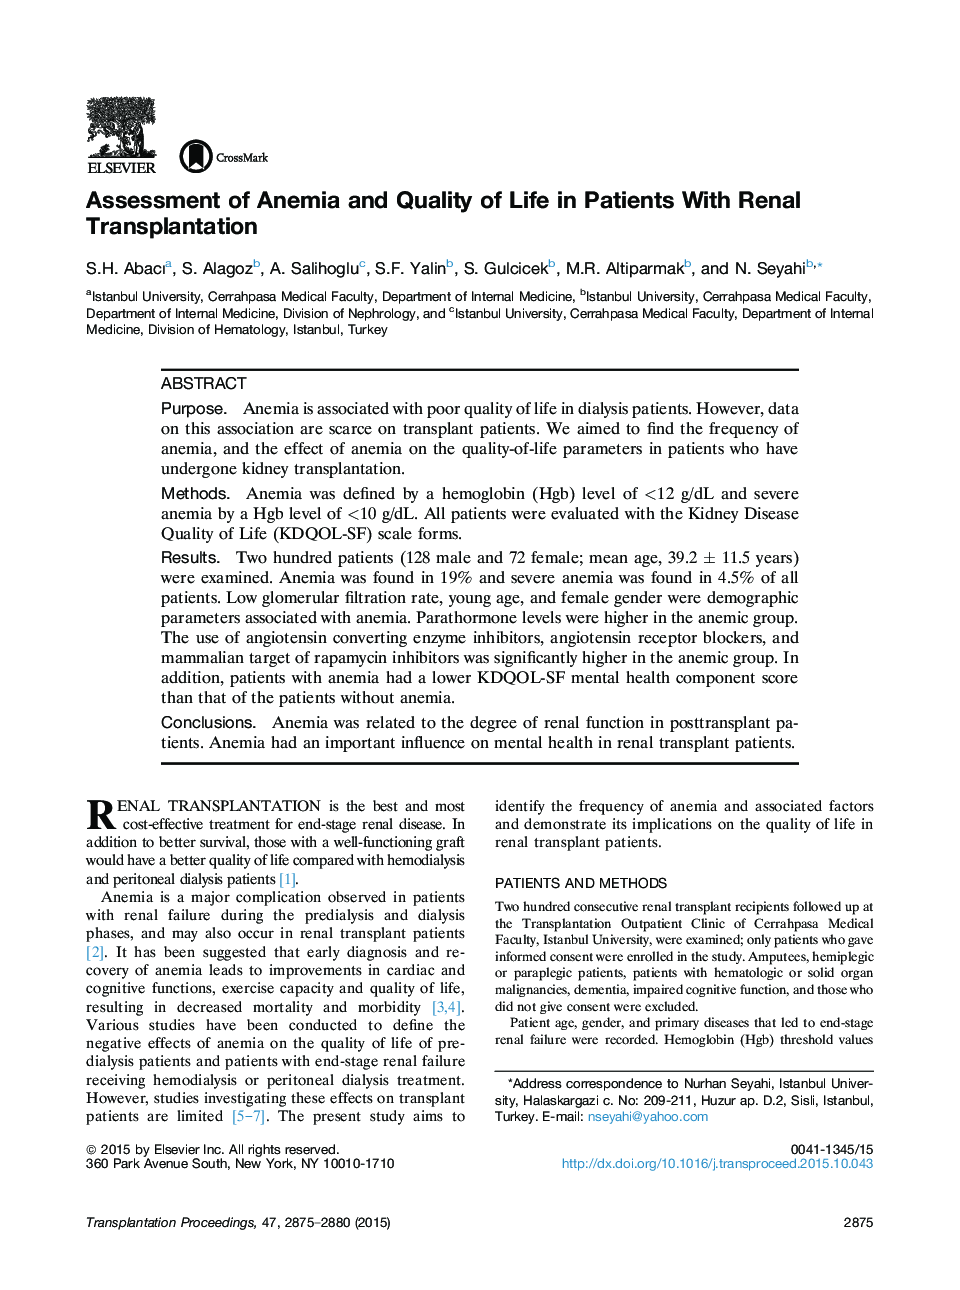 Assessment of Anemia and Quality of Life in Patients With Renal Transplantation